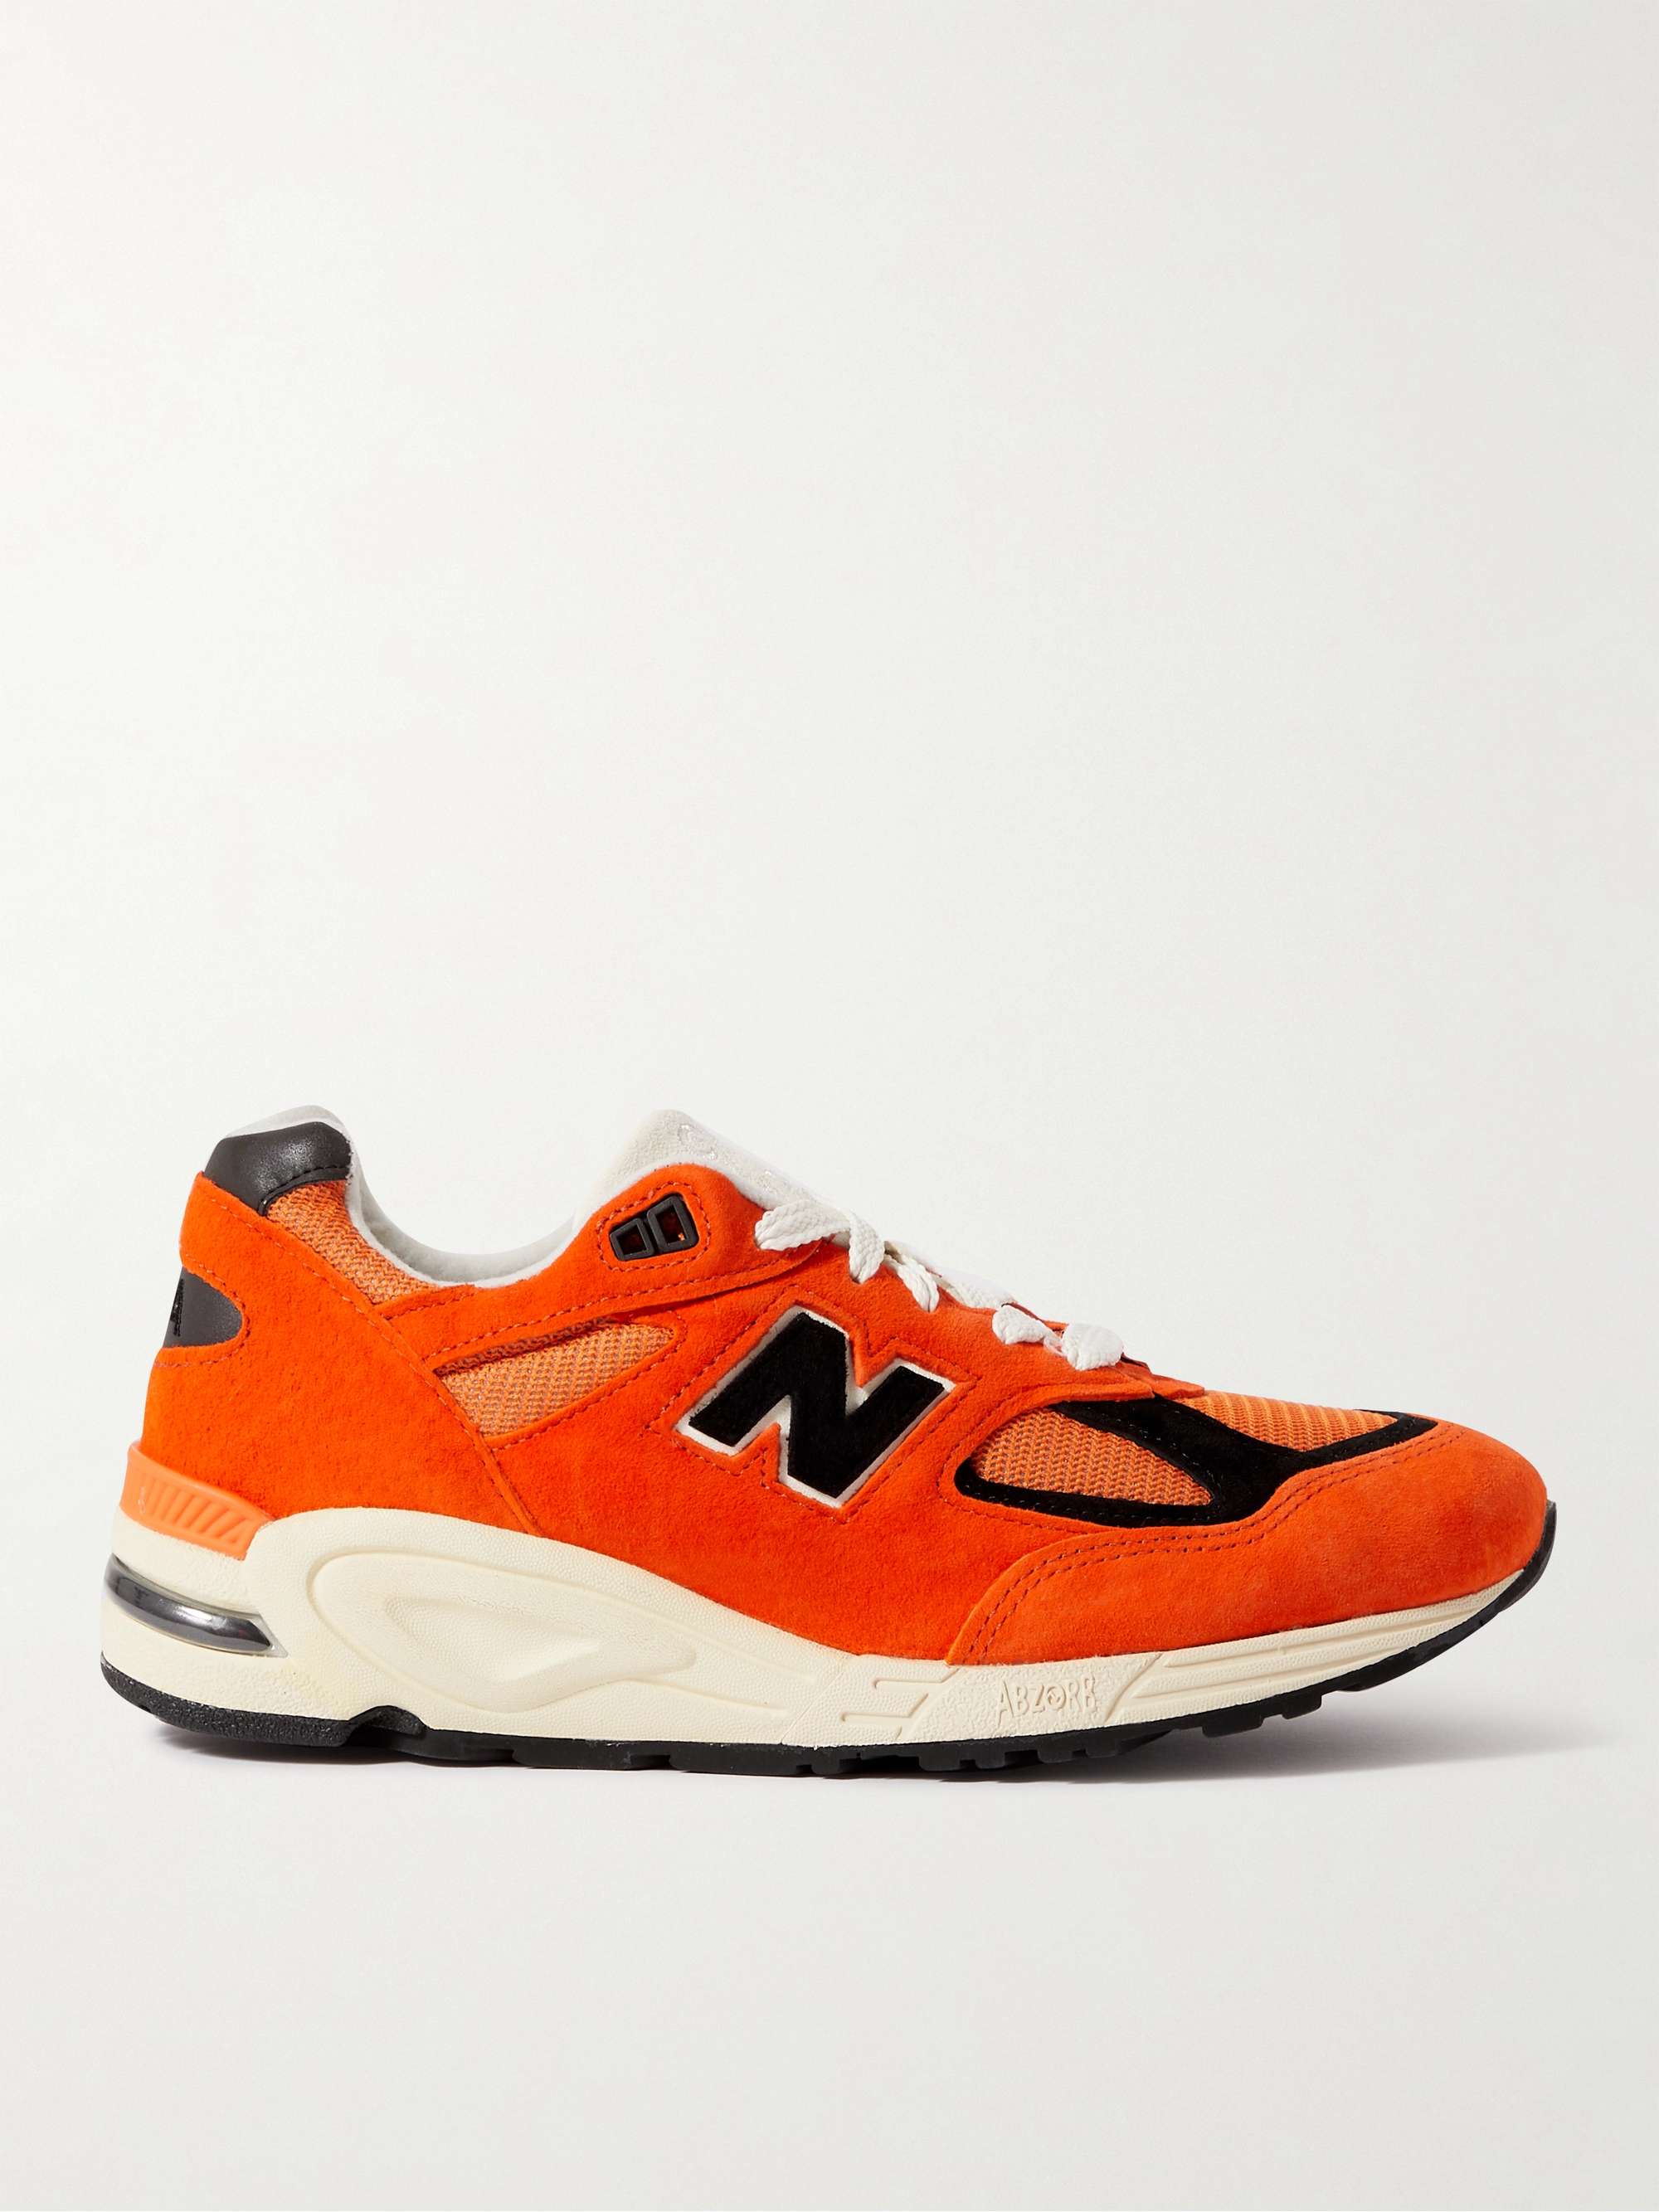 NEW BALANCE 990v2 Mesh and Suede Sneakers | MR PORTER